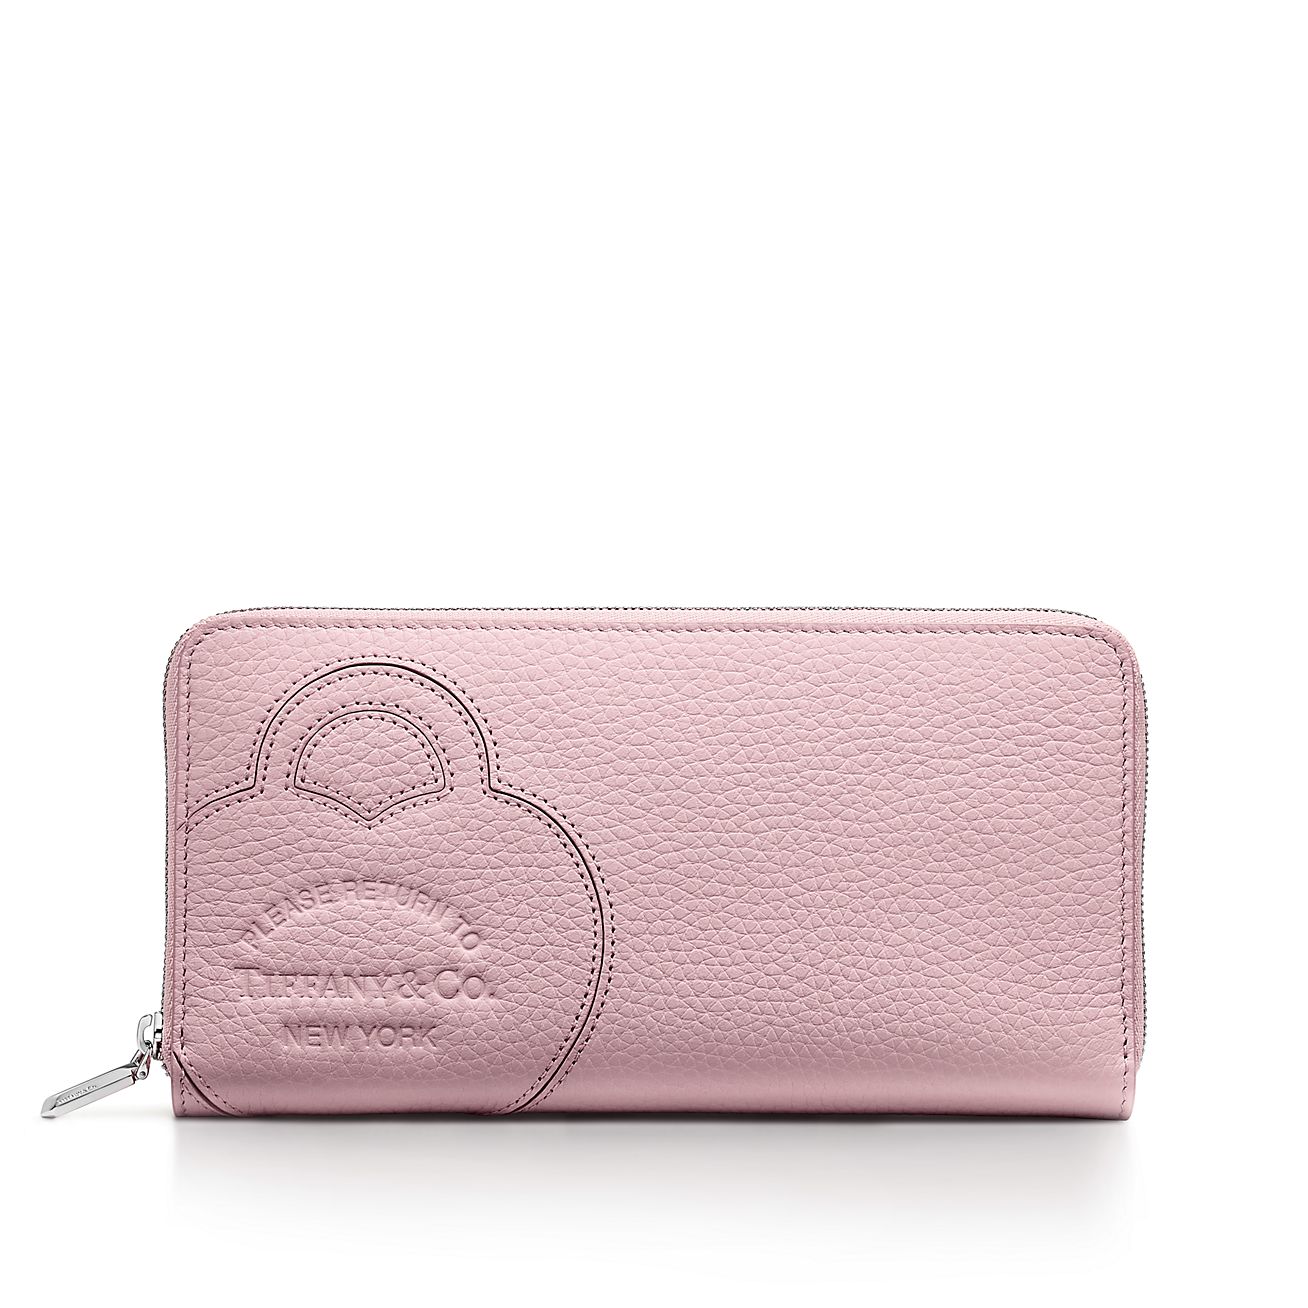 Return to Tiffany® Large Zip Wallet in Crystal Pink Leather | Tiffany & Co.